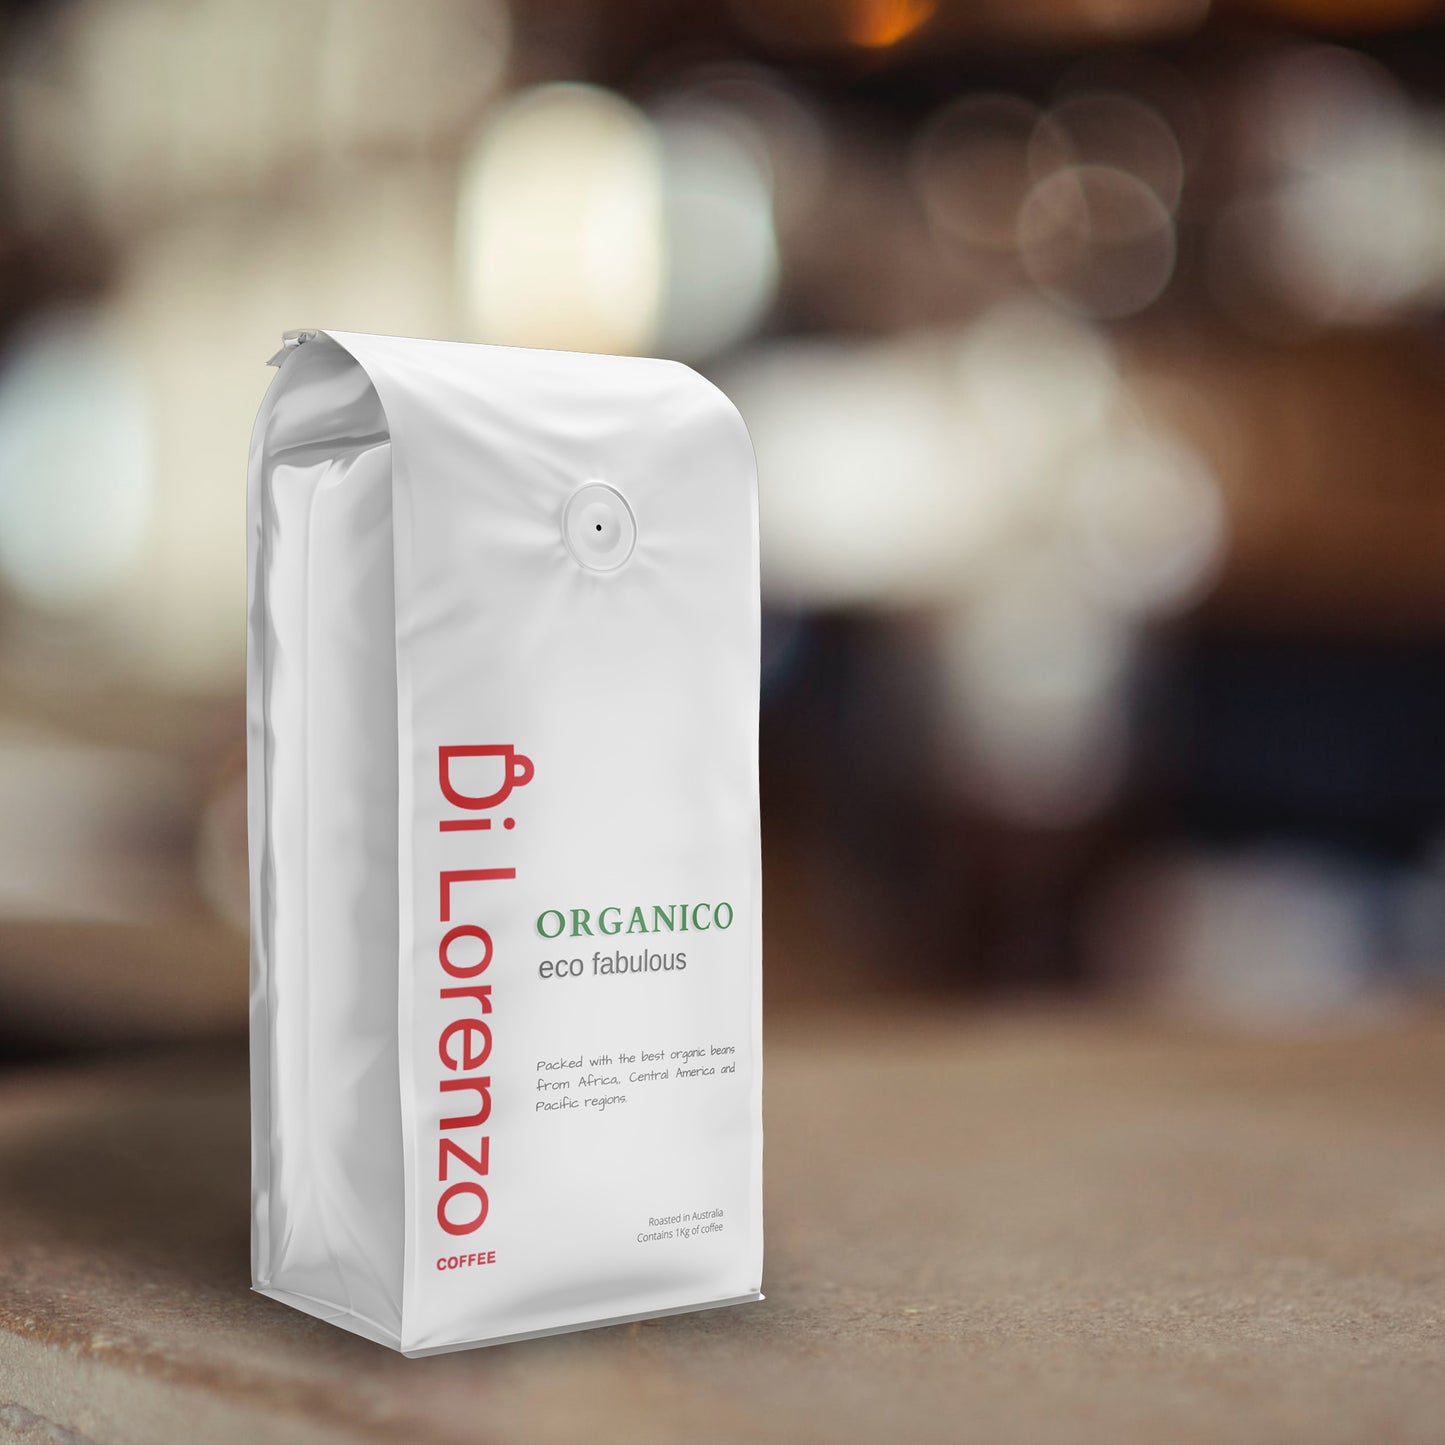 Bag of Organic Best quality di lorenzo coffee beans, the bag is white and it desbribe the eco-fabolous coffee beans, the bets organic coffee espresso in australia